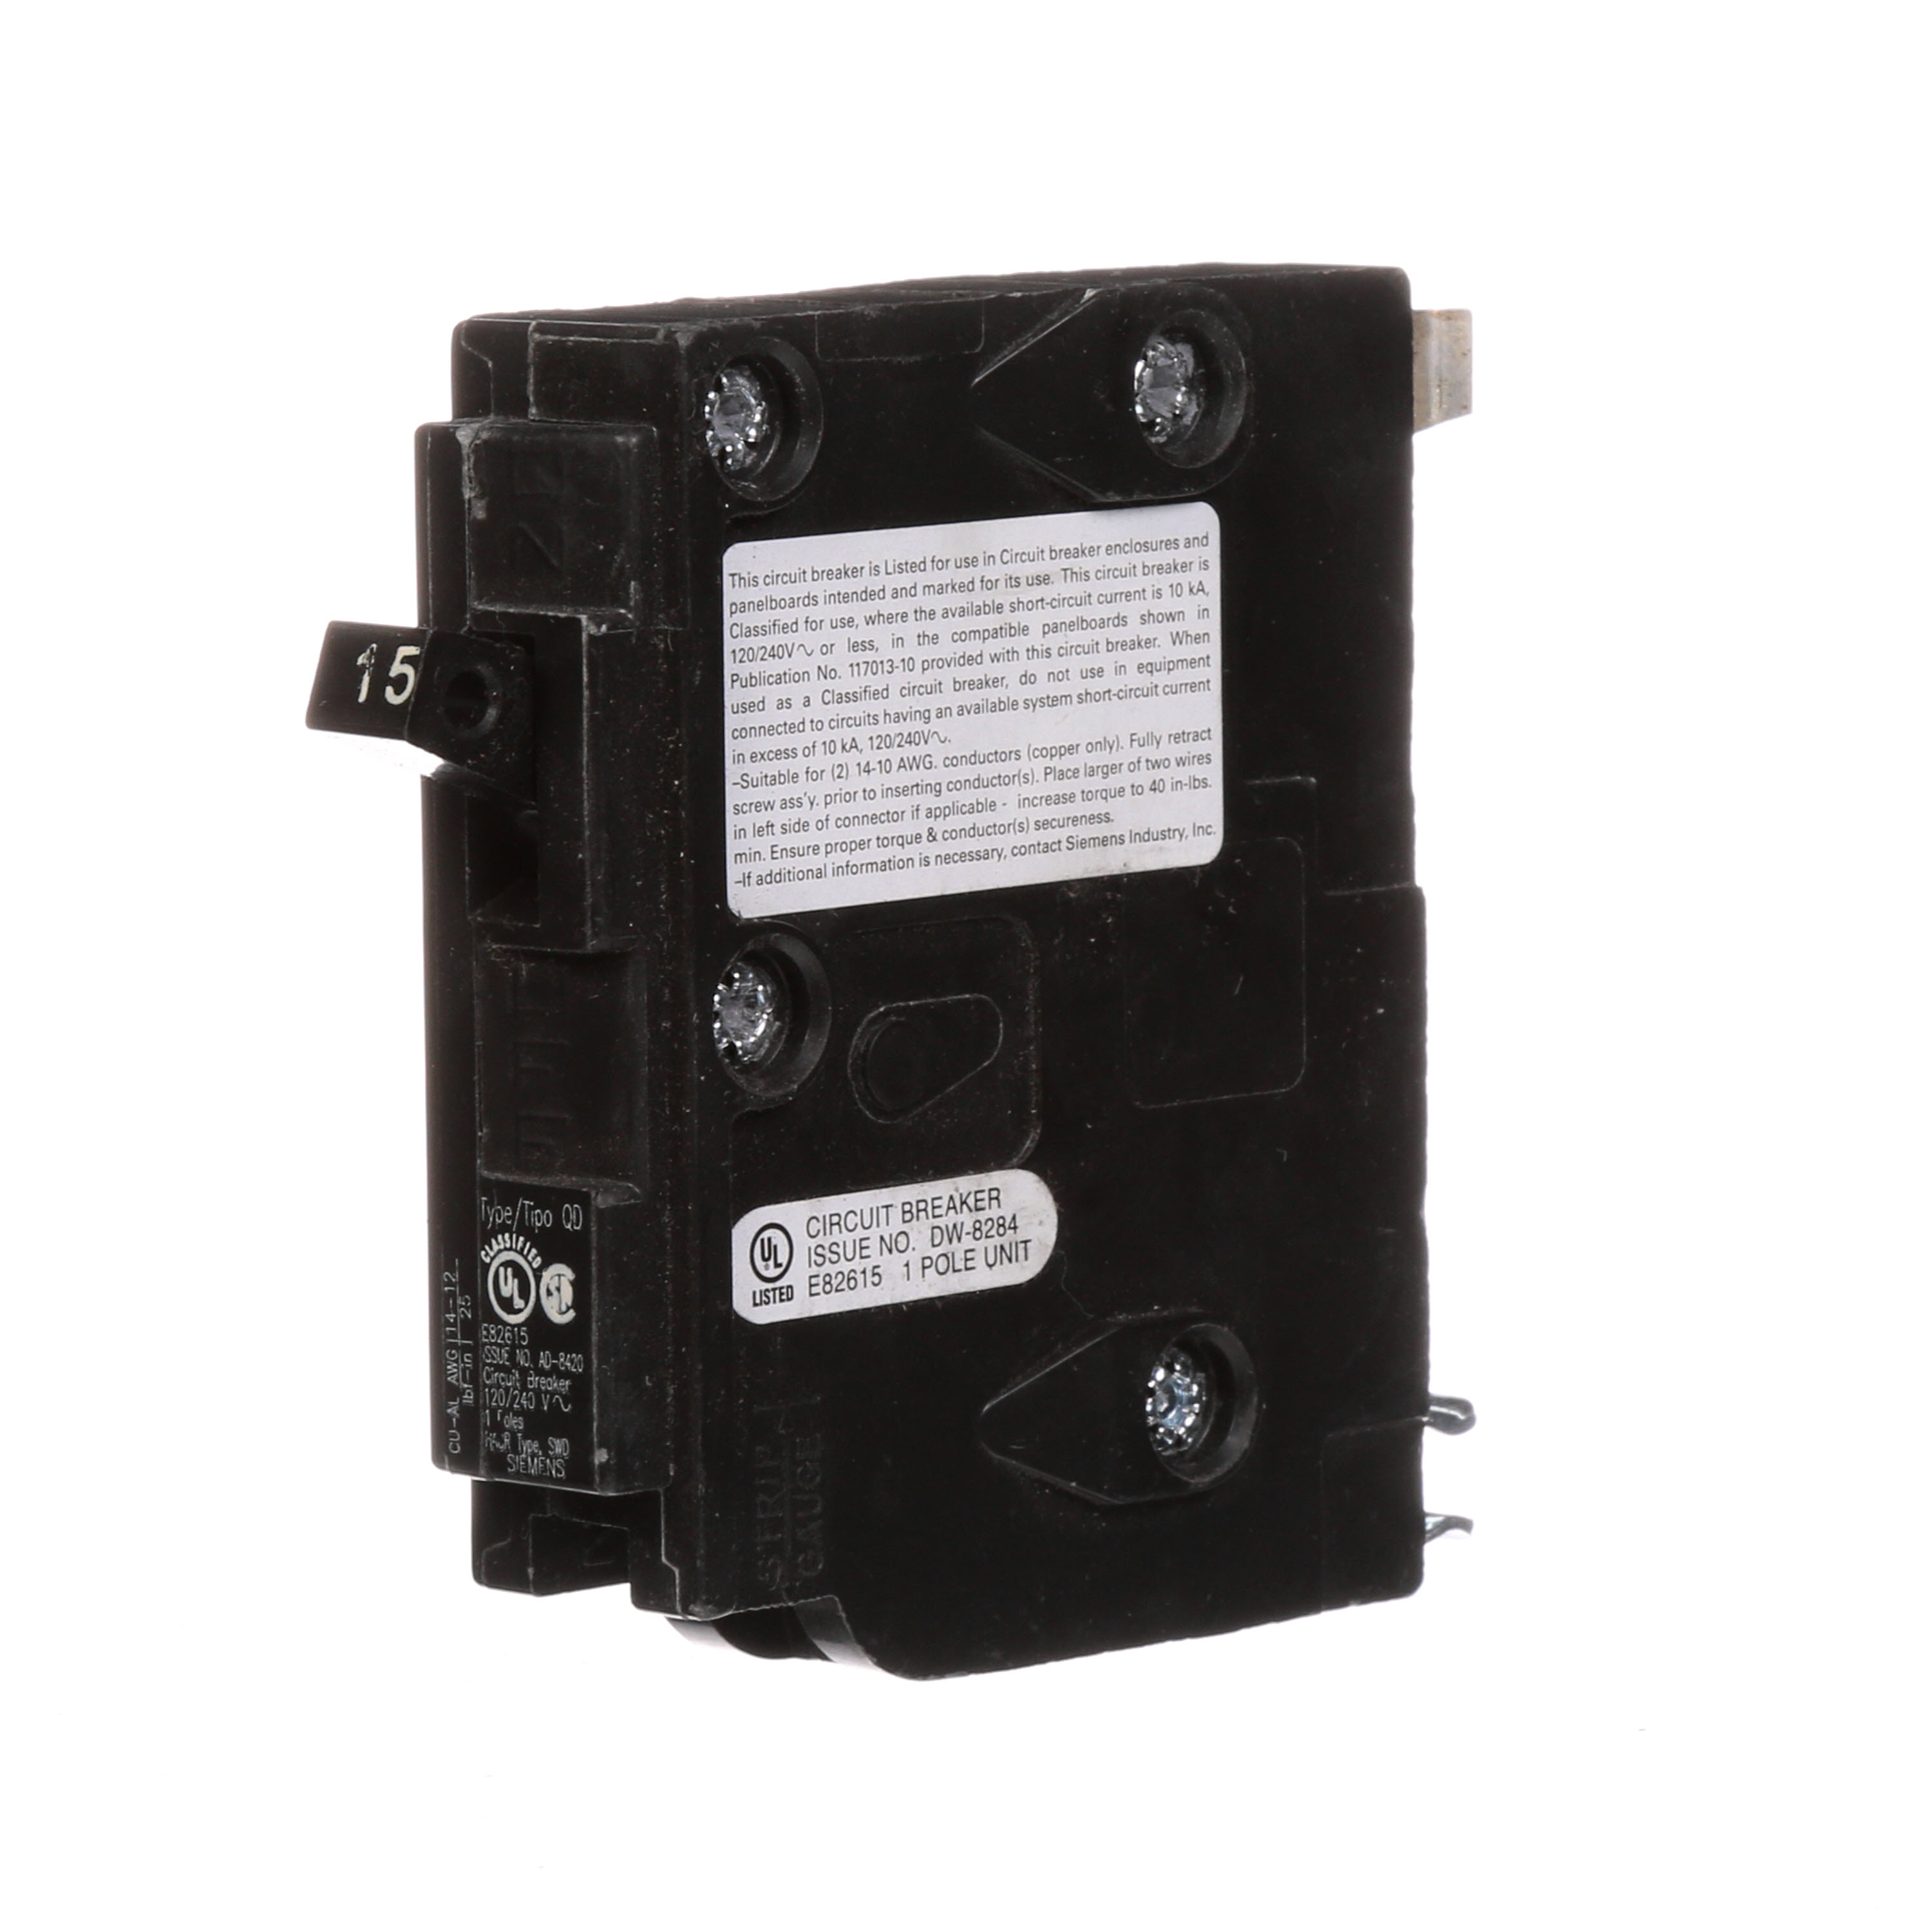 Siemens Low Voltage Residential Circuit Breakers. QD 3/4 IN Plug-In 1-Pole circuit breaker. Rated 120V (15A) AIR (10 kA). Special features HACR rated, UL listed and classified.